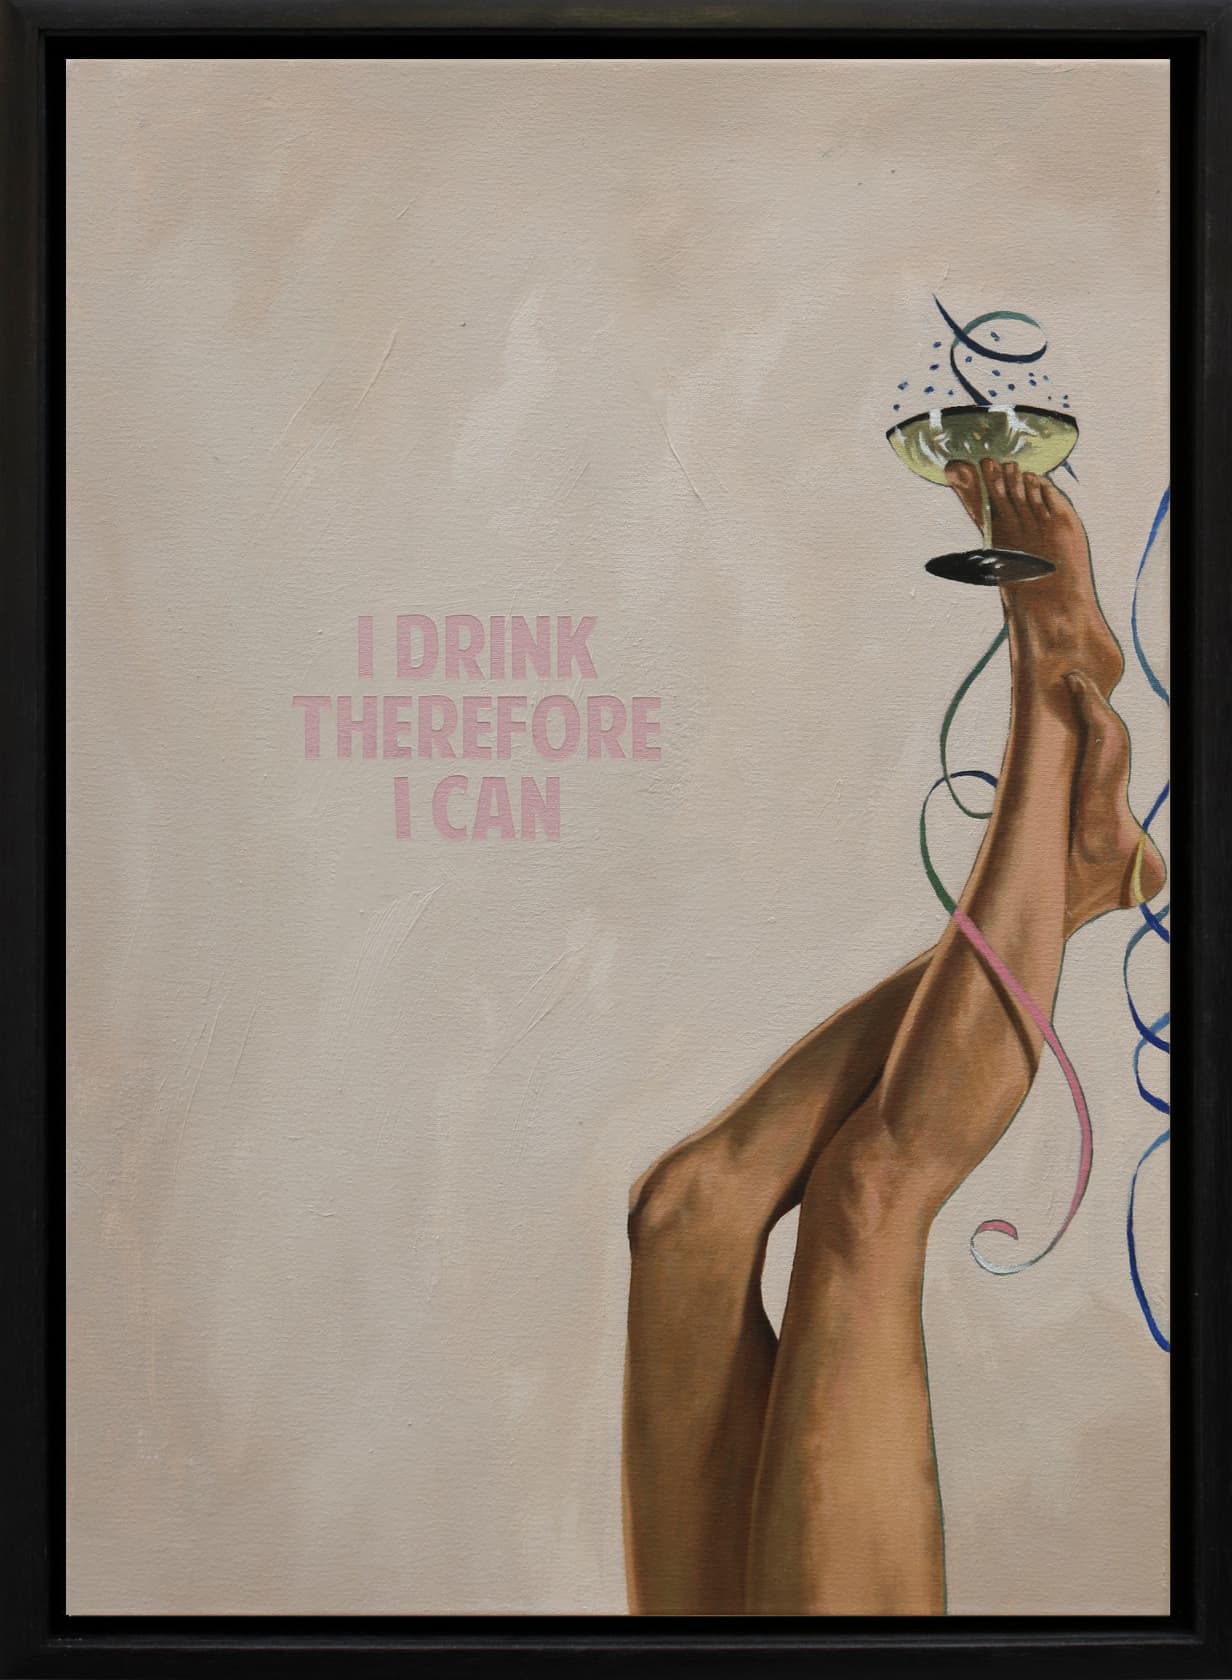 The Connor Brothers, I Drink Therefore I Can, 2019